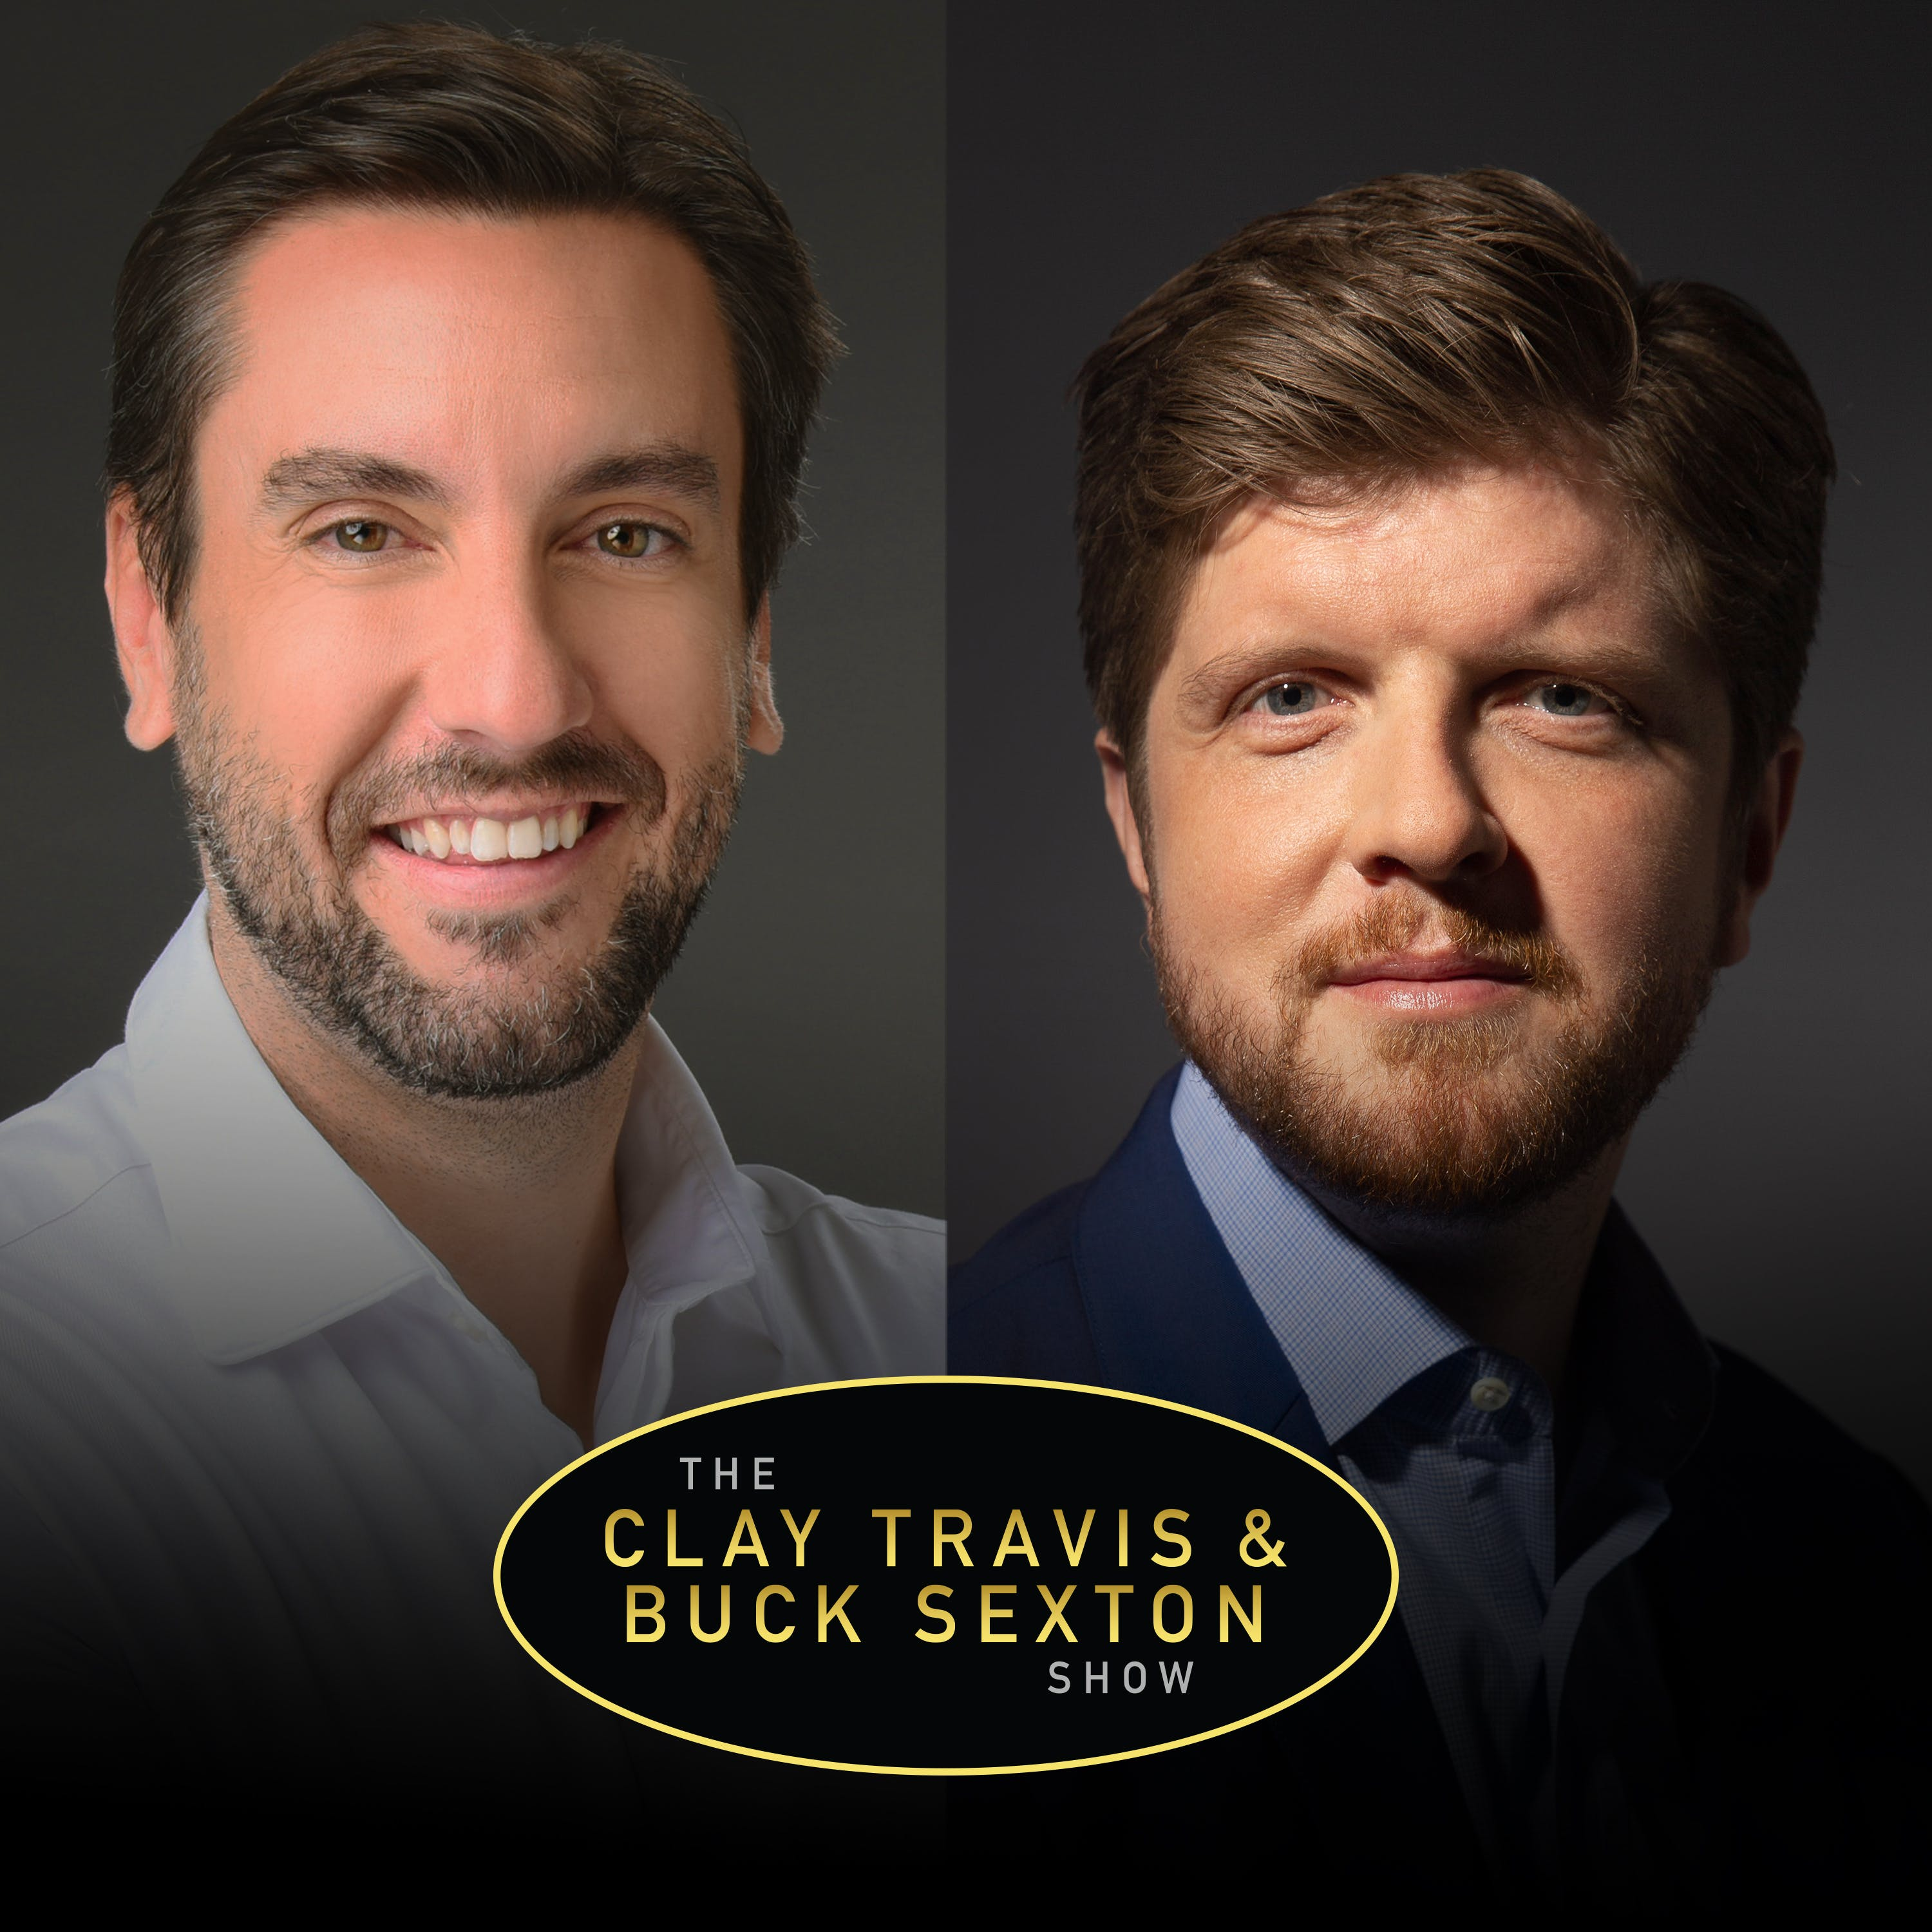 Clay Travis and Buck Sexton Show H1 – Jul 27 2021